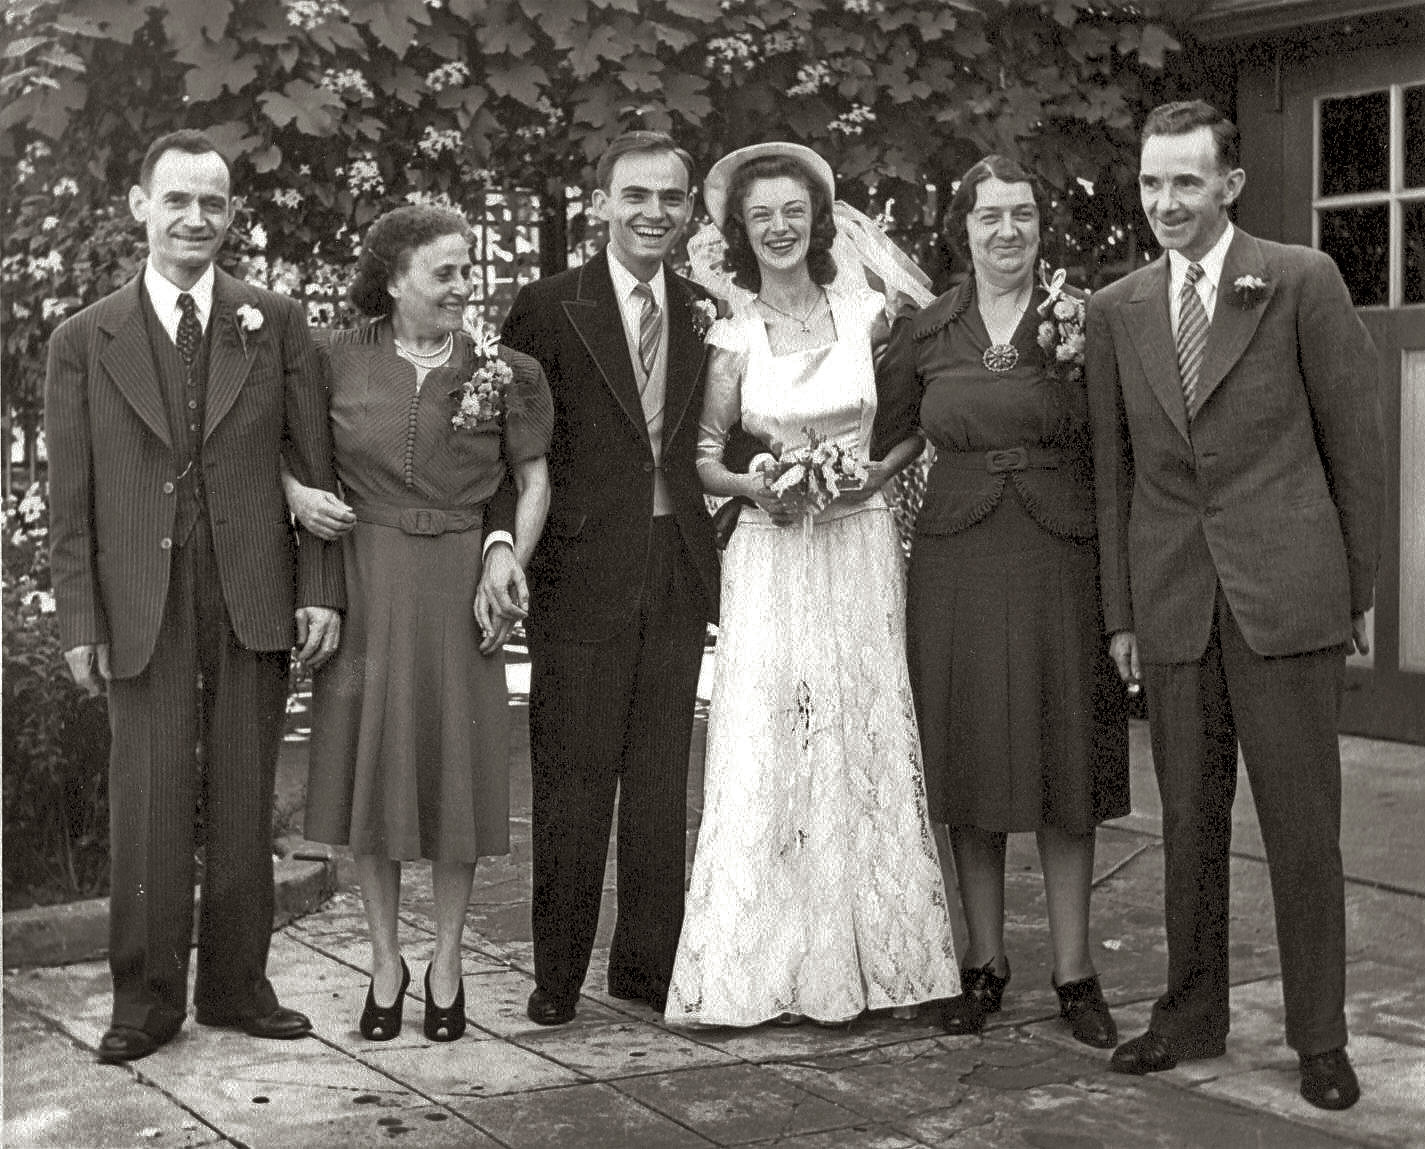 My wife's parents: Louis Donato (son of Italian immigrants) and Nancy Lowry (daughter of Irish-immigrant father and American-born Irish mother) on their wedding day. On left: Illuminato and Santina Donato; on right: Philomena and Michael Lowry. September 20, 1941, in New York City.